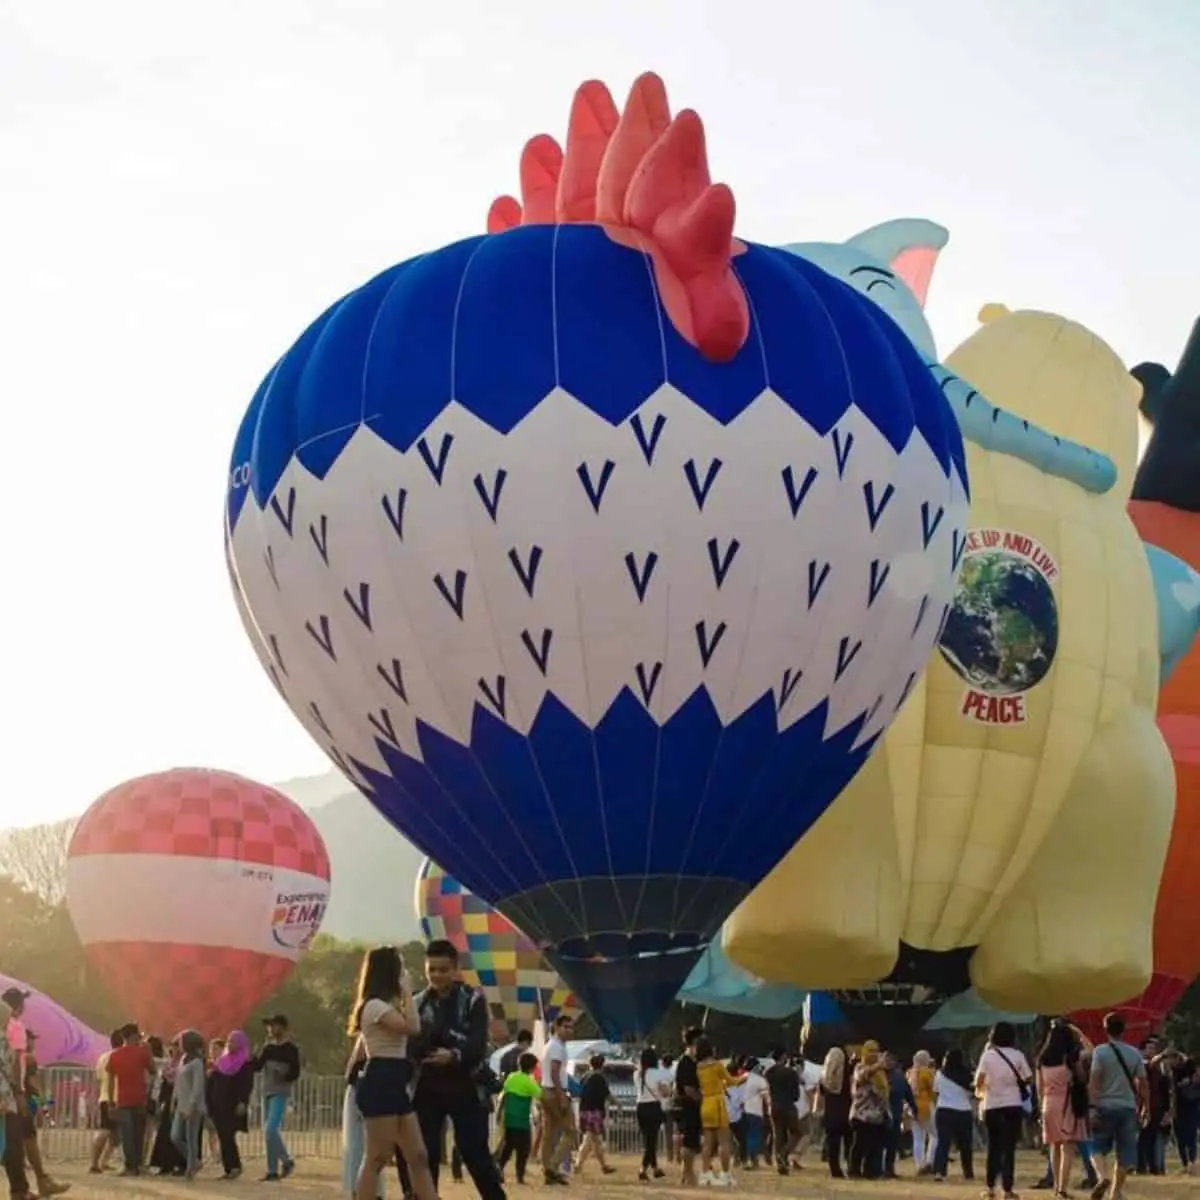 Penang Hot Air Balloon Fiesta with hot air balloons on display and busy tourists visiting the area